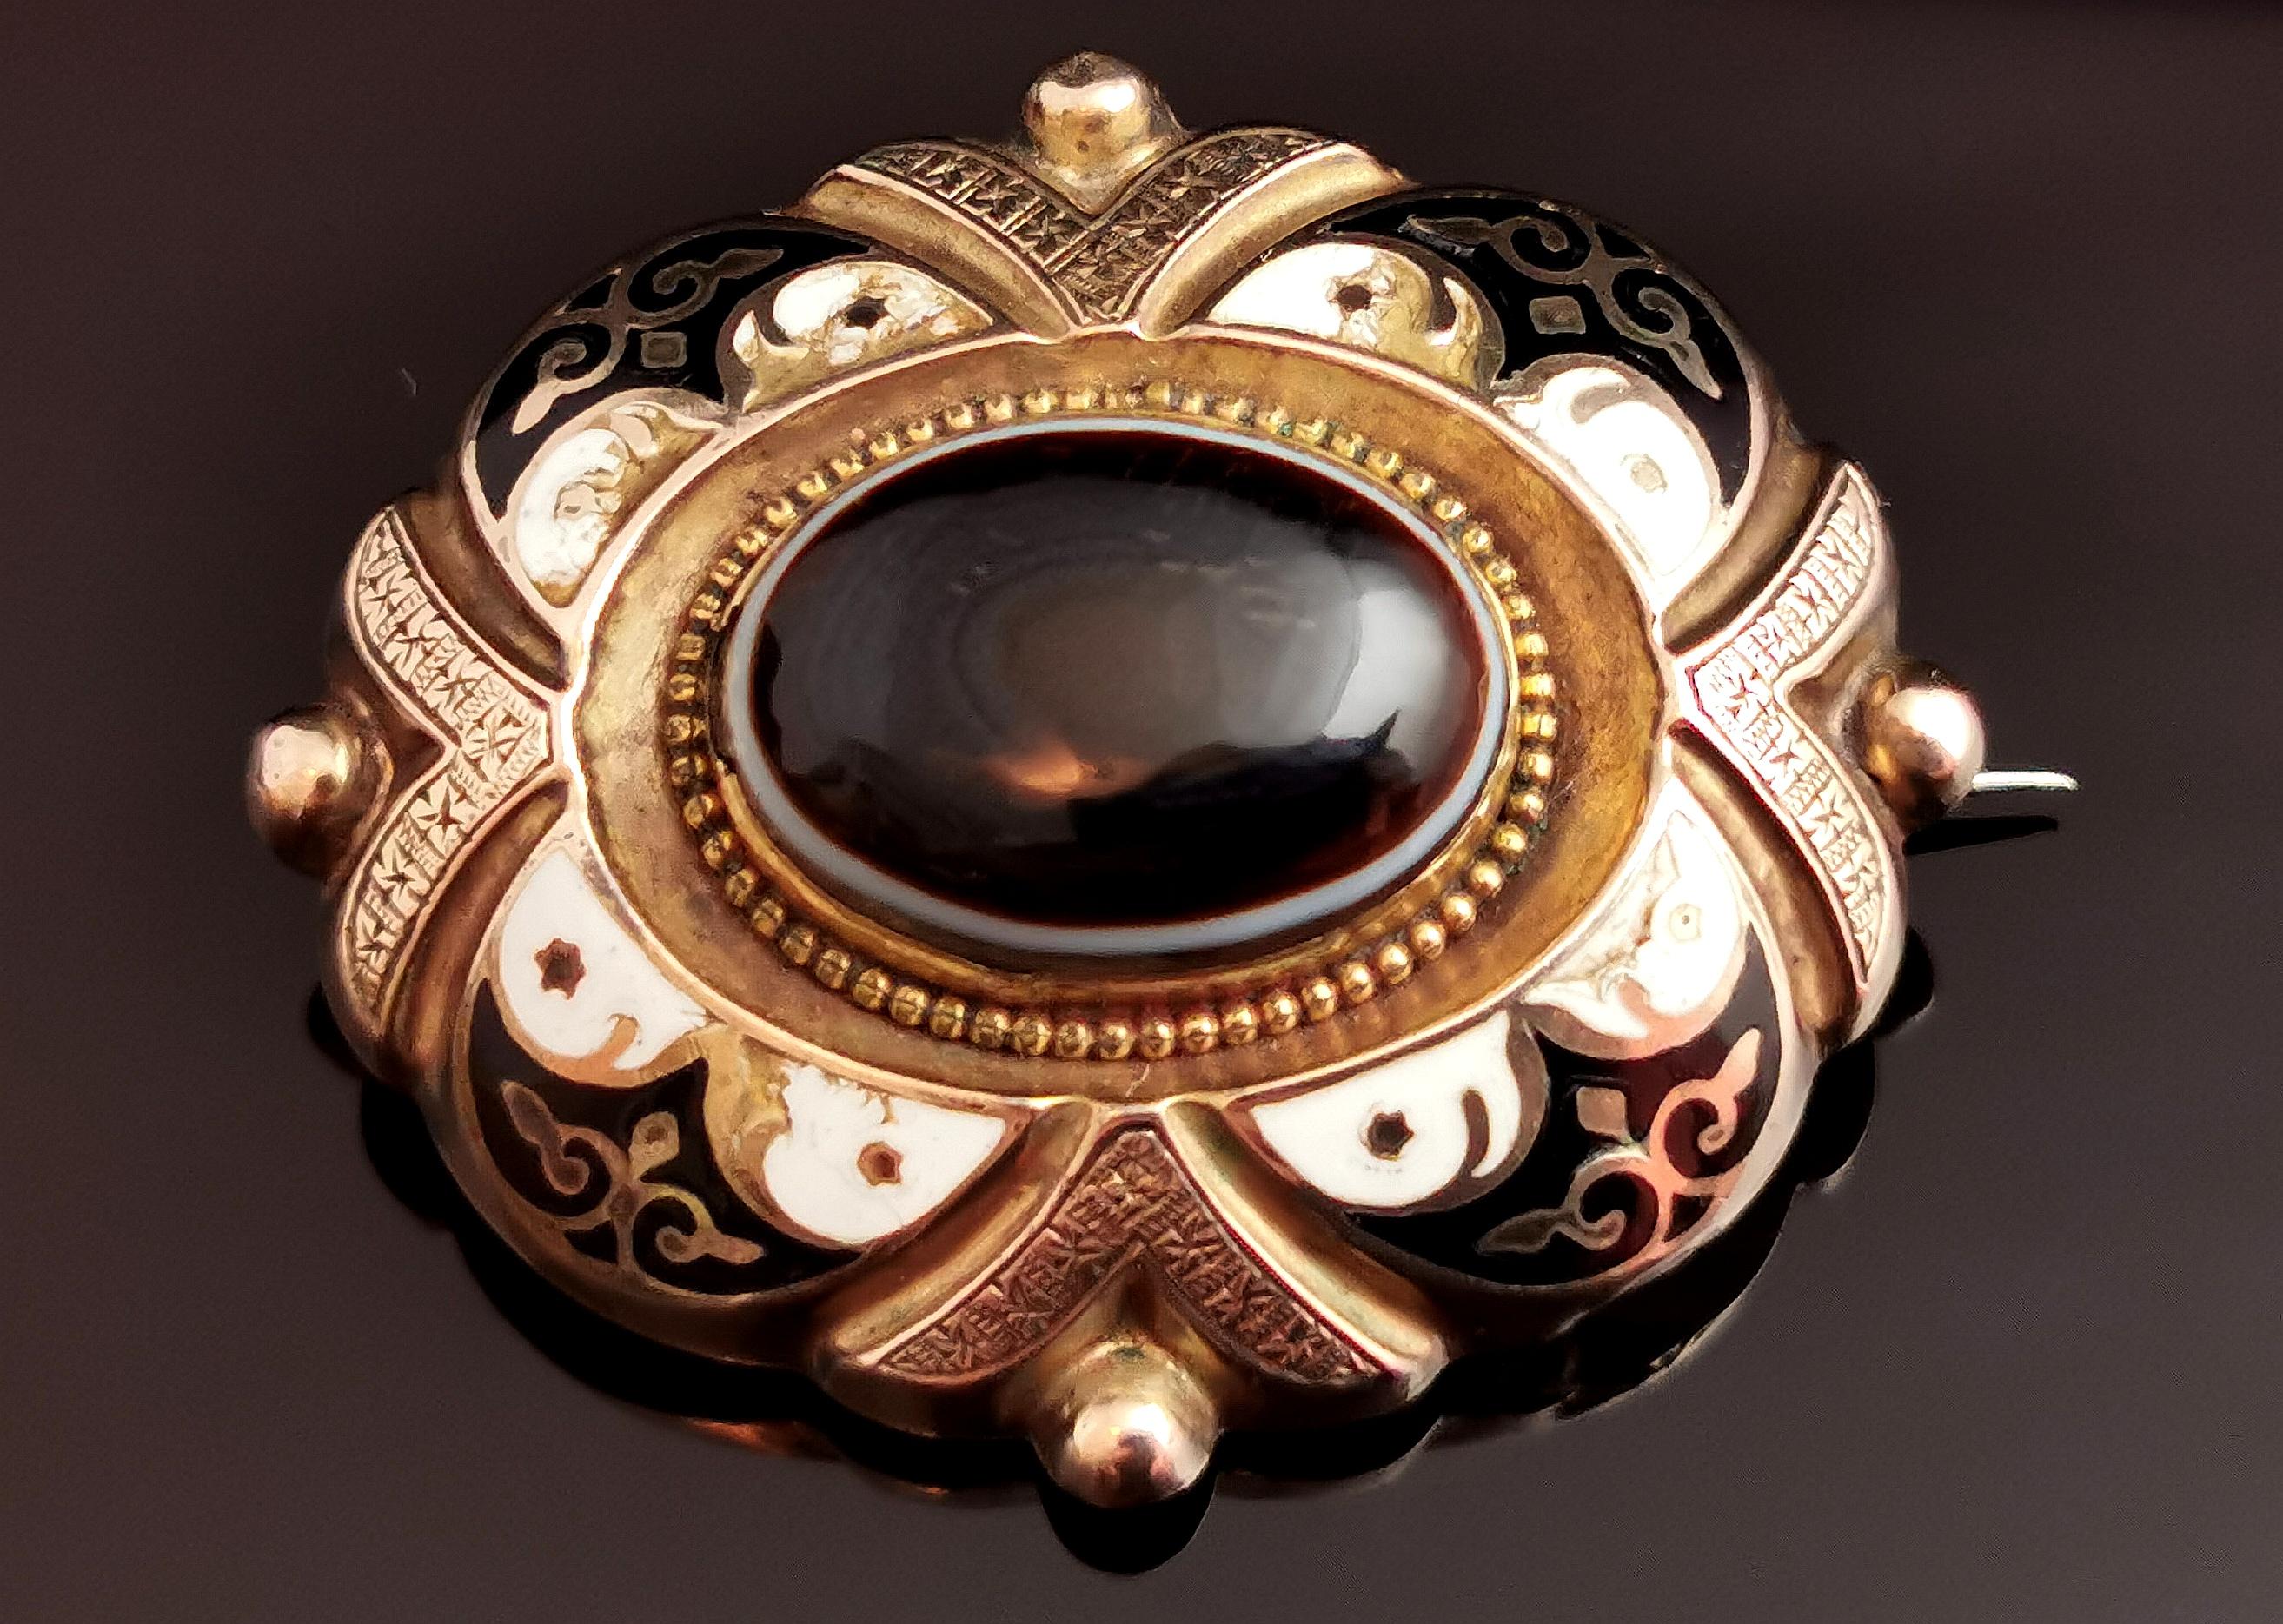 A beautiful, antique Victorian mourning brooch.

Crafted in 9ct gold with a rich aged patina, the brooch is an oval shape with beading and engraving.

The centre is set with a banded agate, a slim white band running around the base of the black /